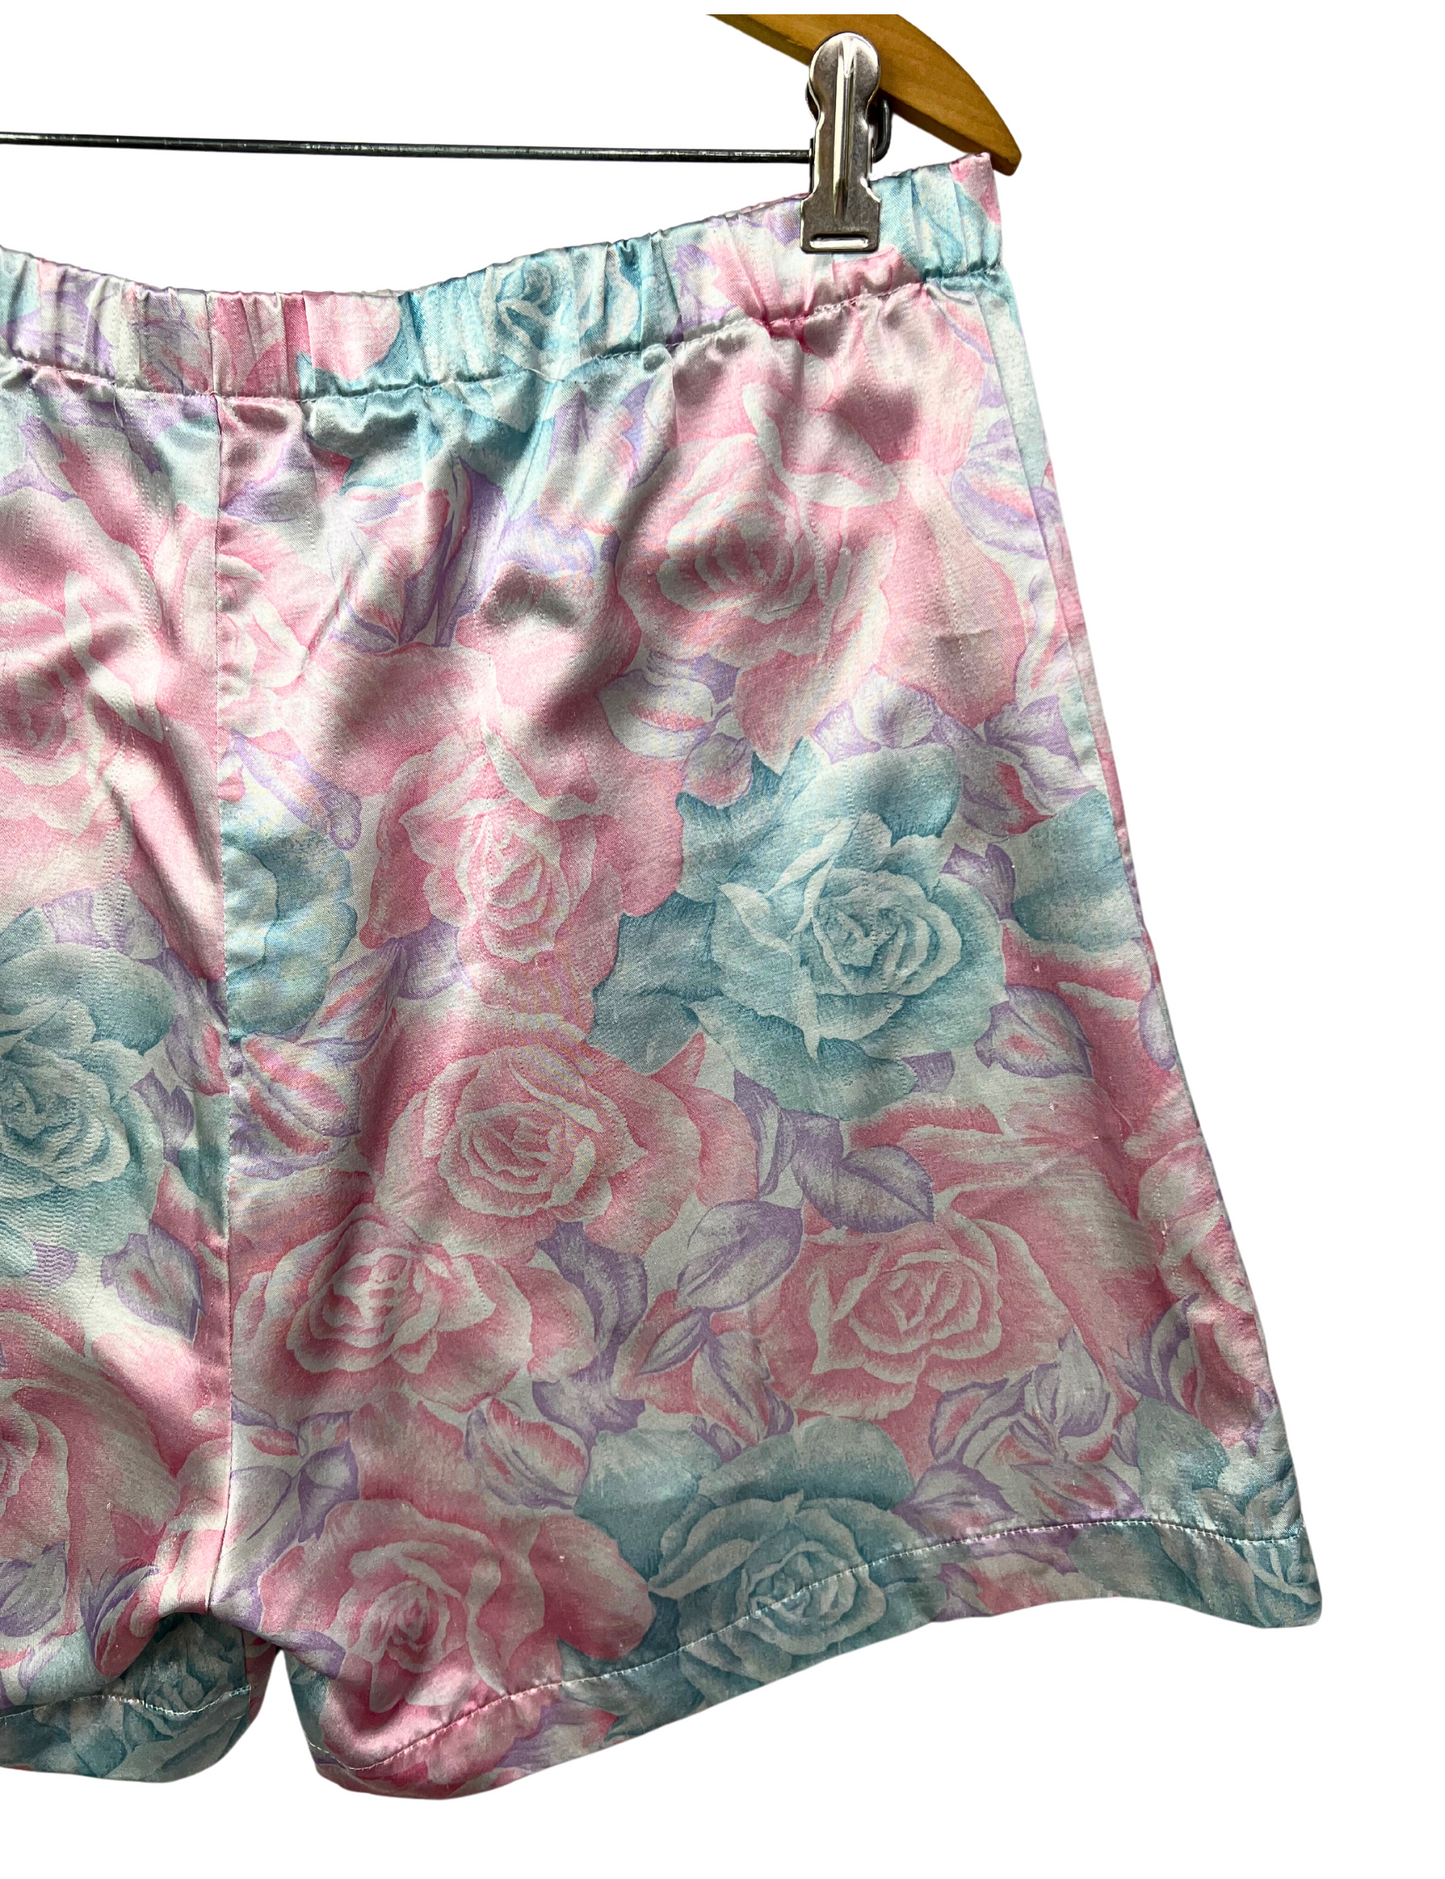 90’s Rose Print Silky Shorts fits S-M